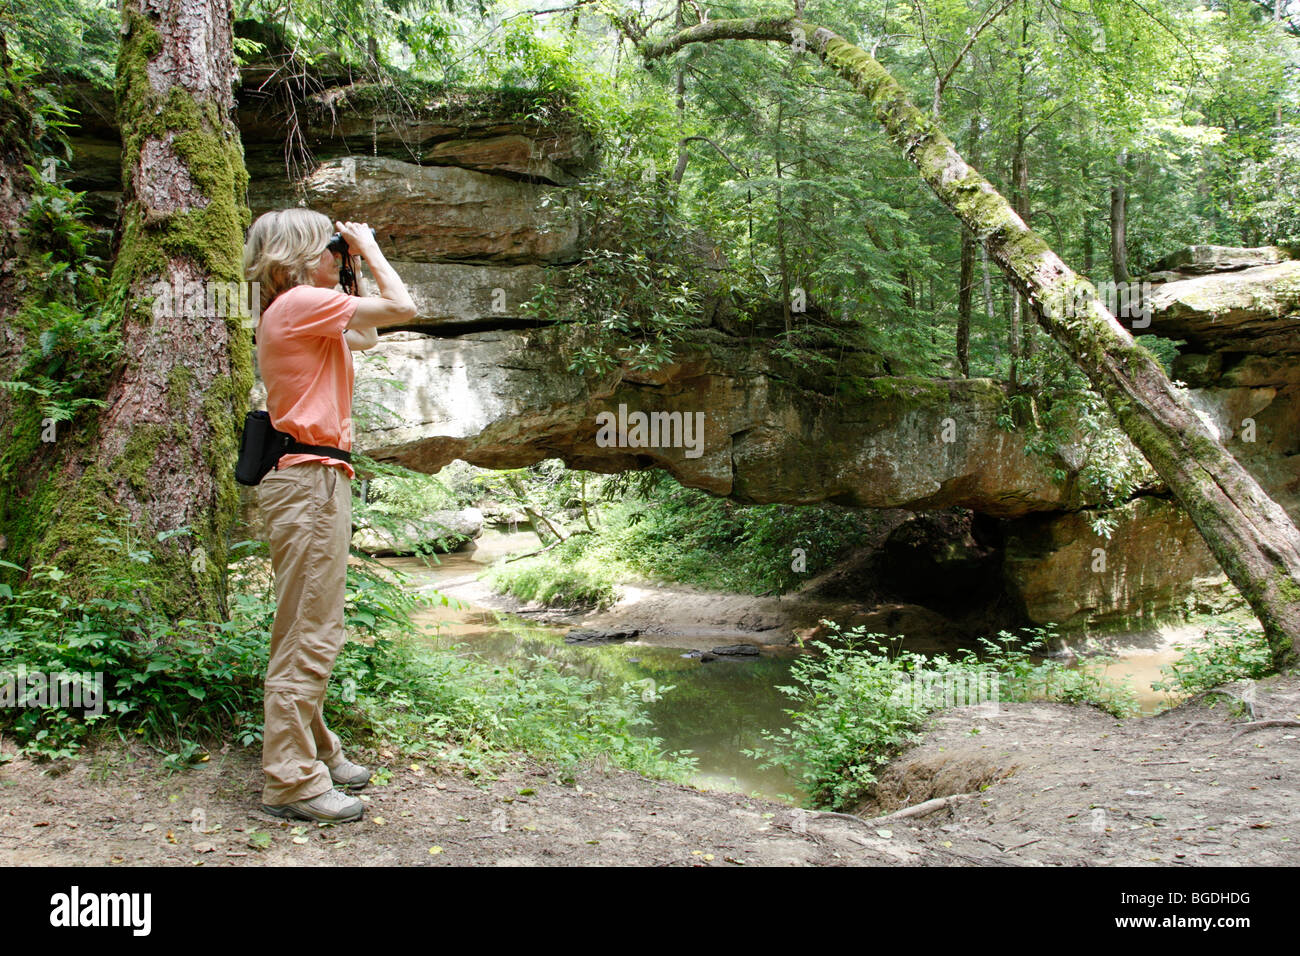 Woman Birdwatcher at Red River Gorge in Daniel Boone National Forest Kentucky Stock Photo